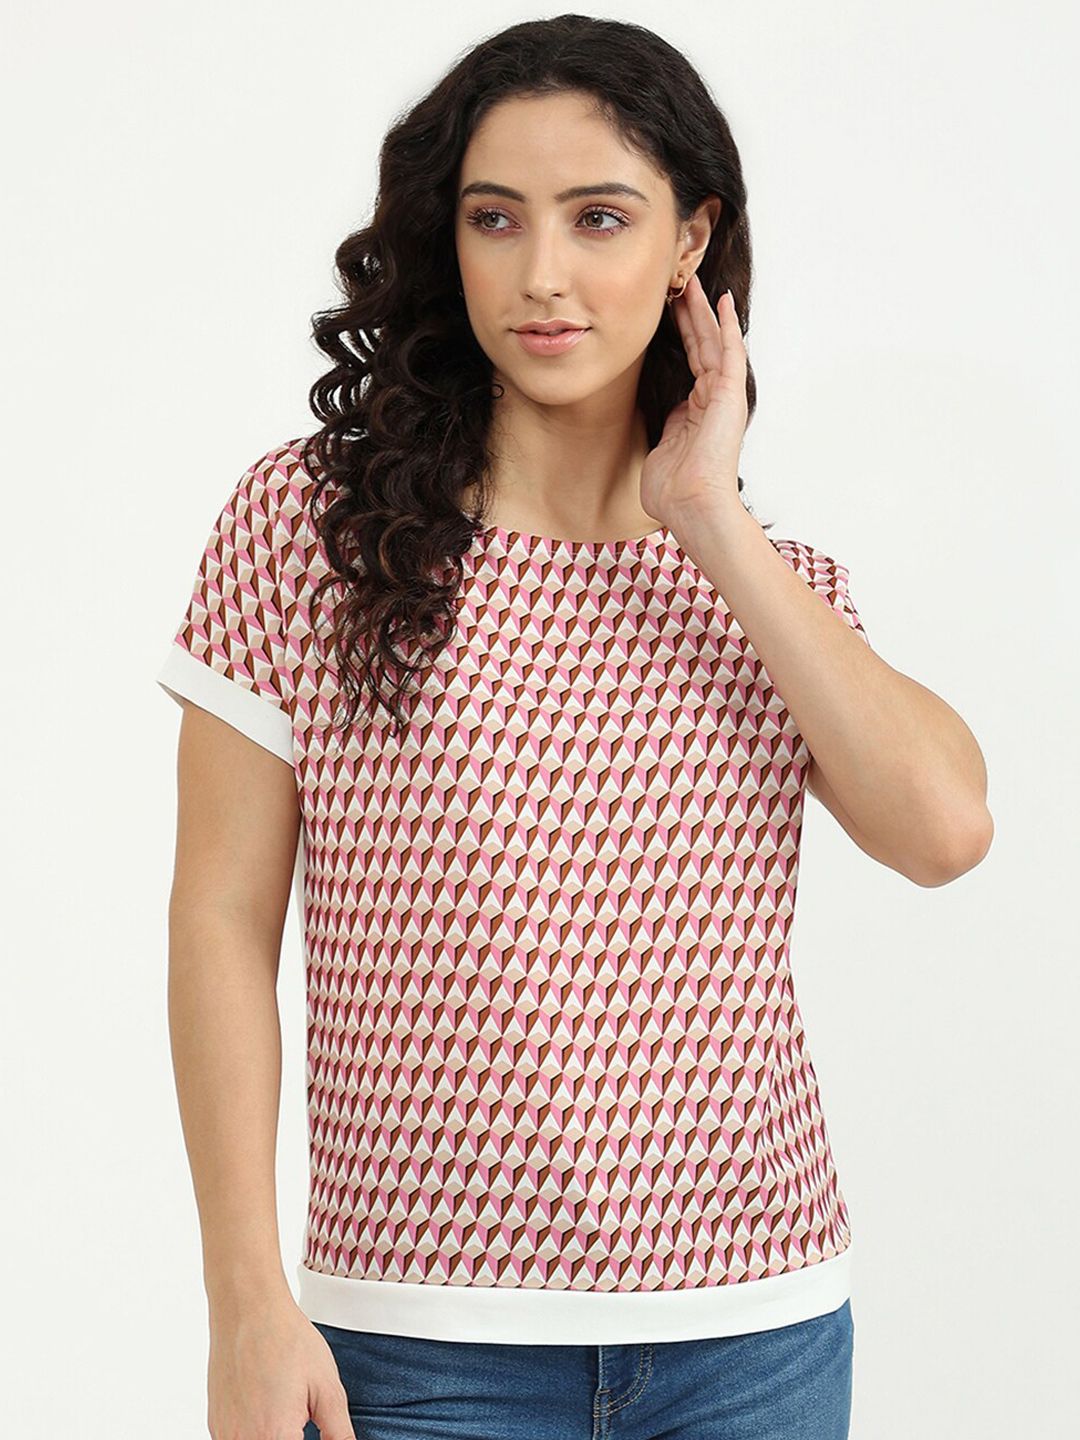 United Colors of Benetton Pink Geometric Print Extended Sleeves Top Price in India